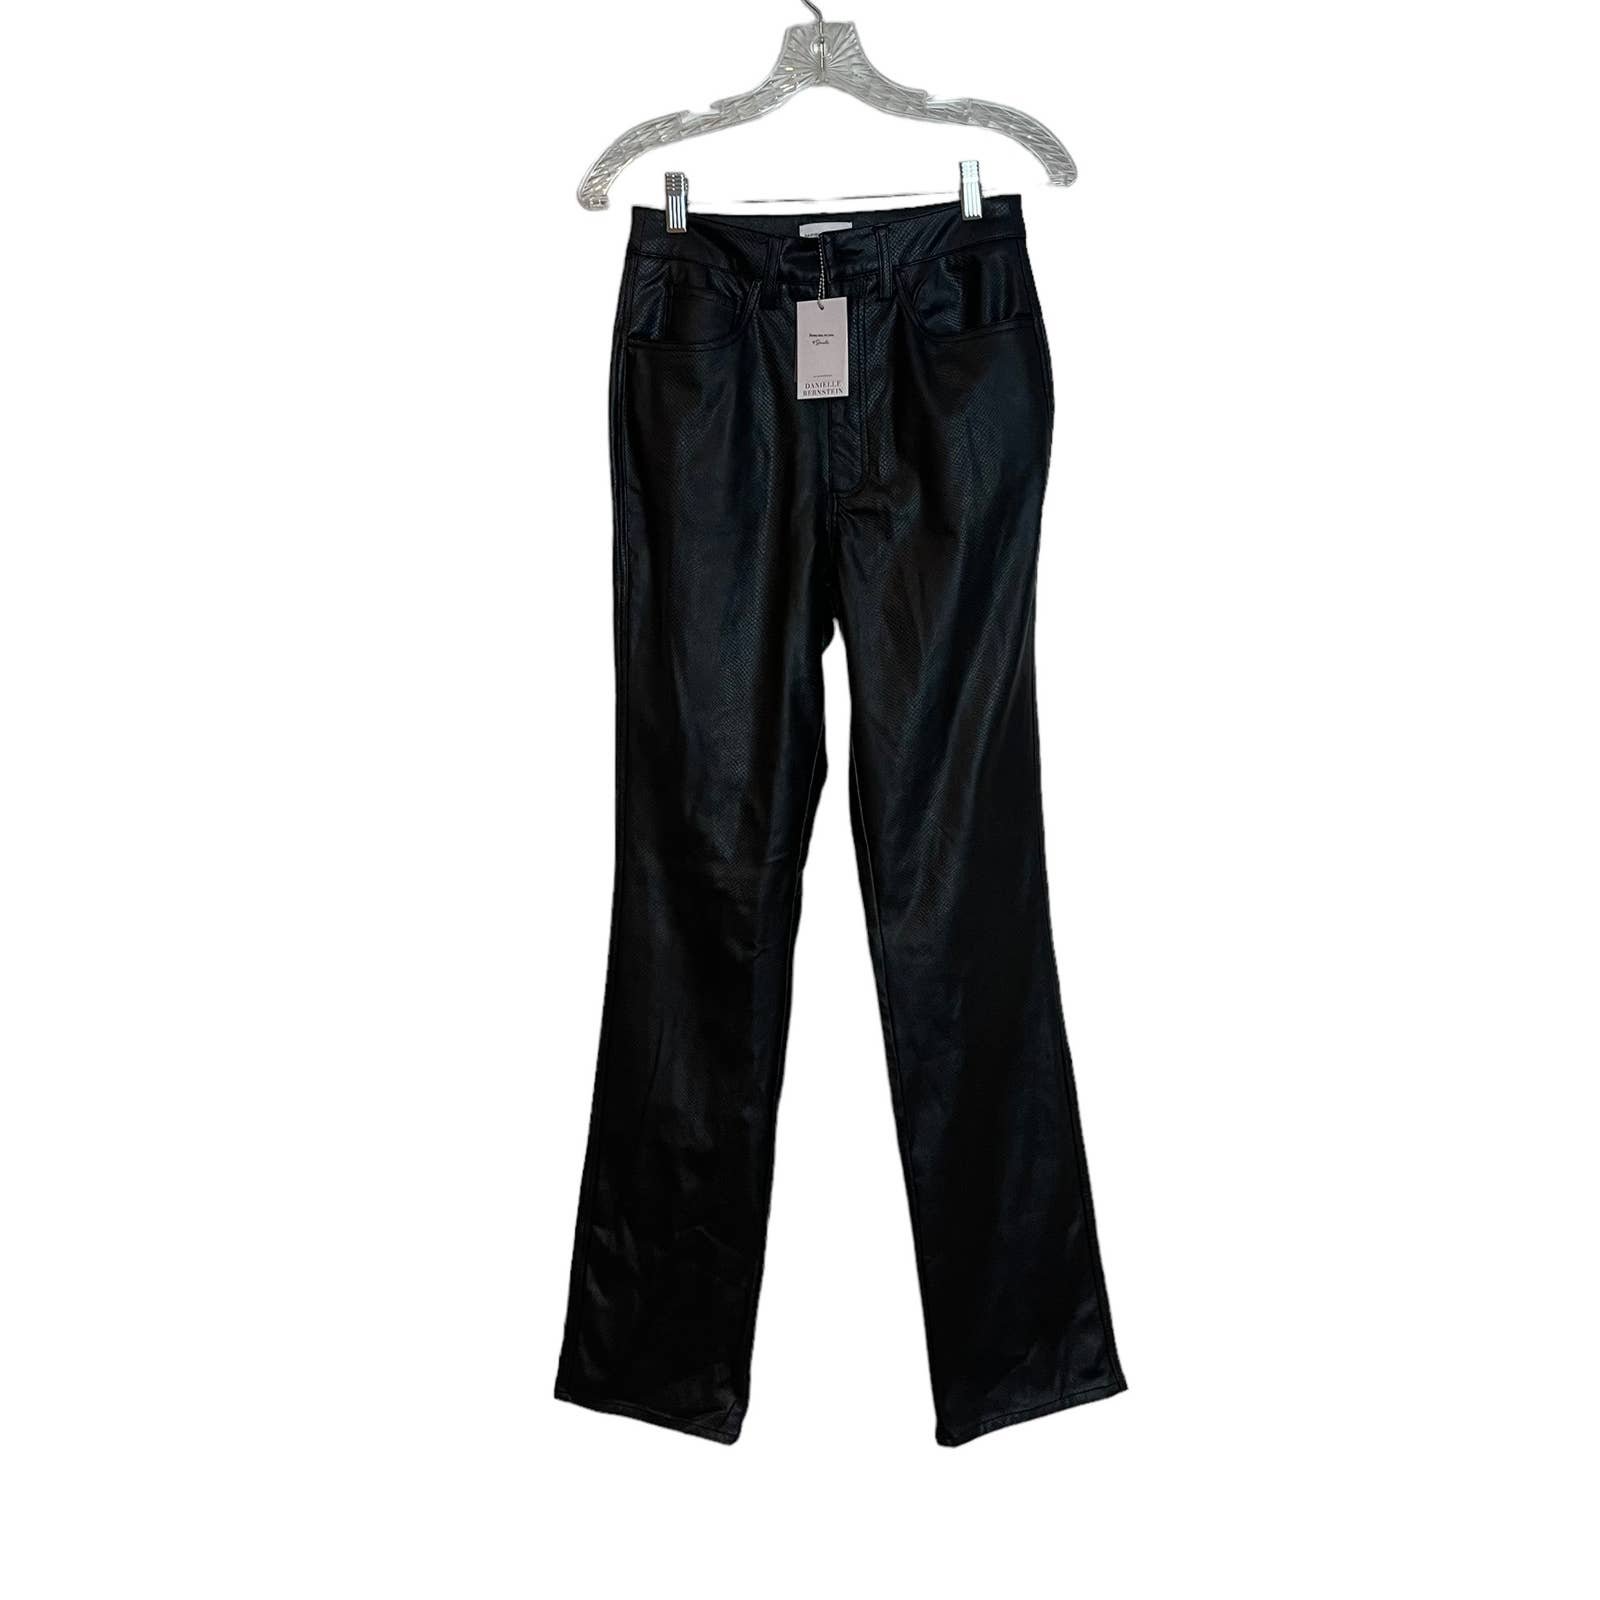 High quality WeWoreWhat  Crop Ankle Flare Embossed Faux Leather Bootcut Pants Black 26 NWT Ivff173yo Zero Profit 